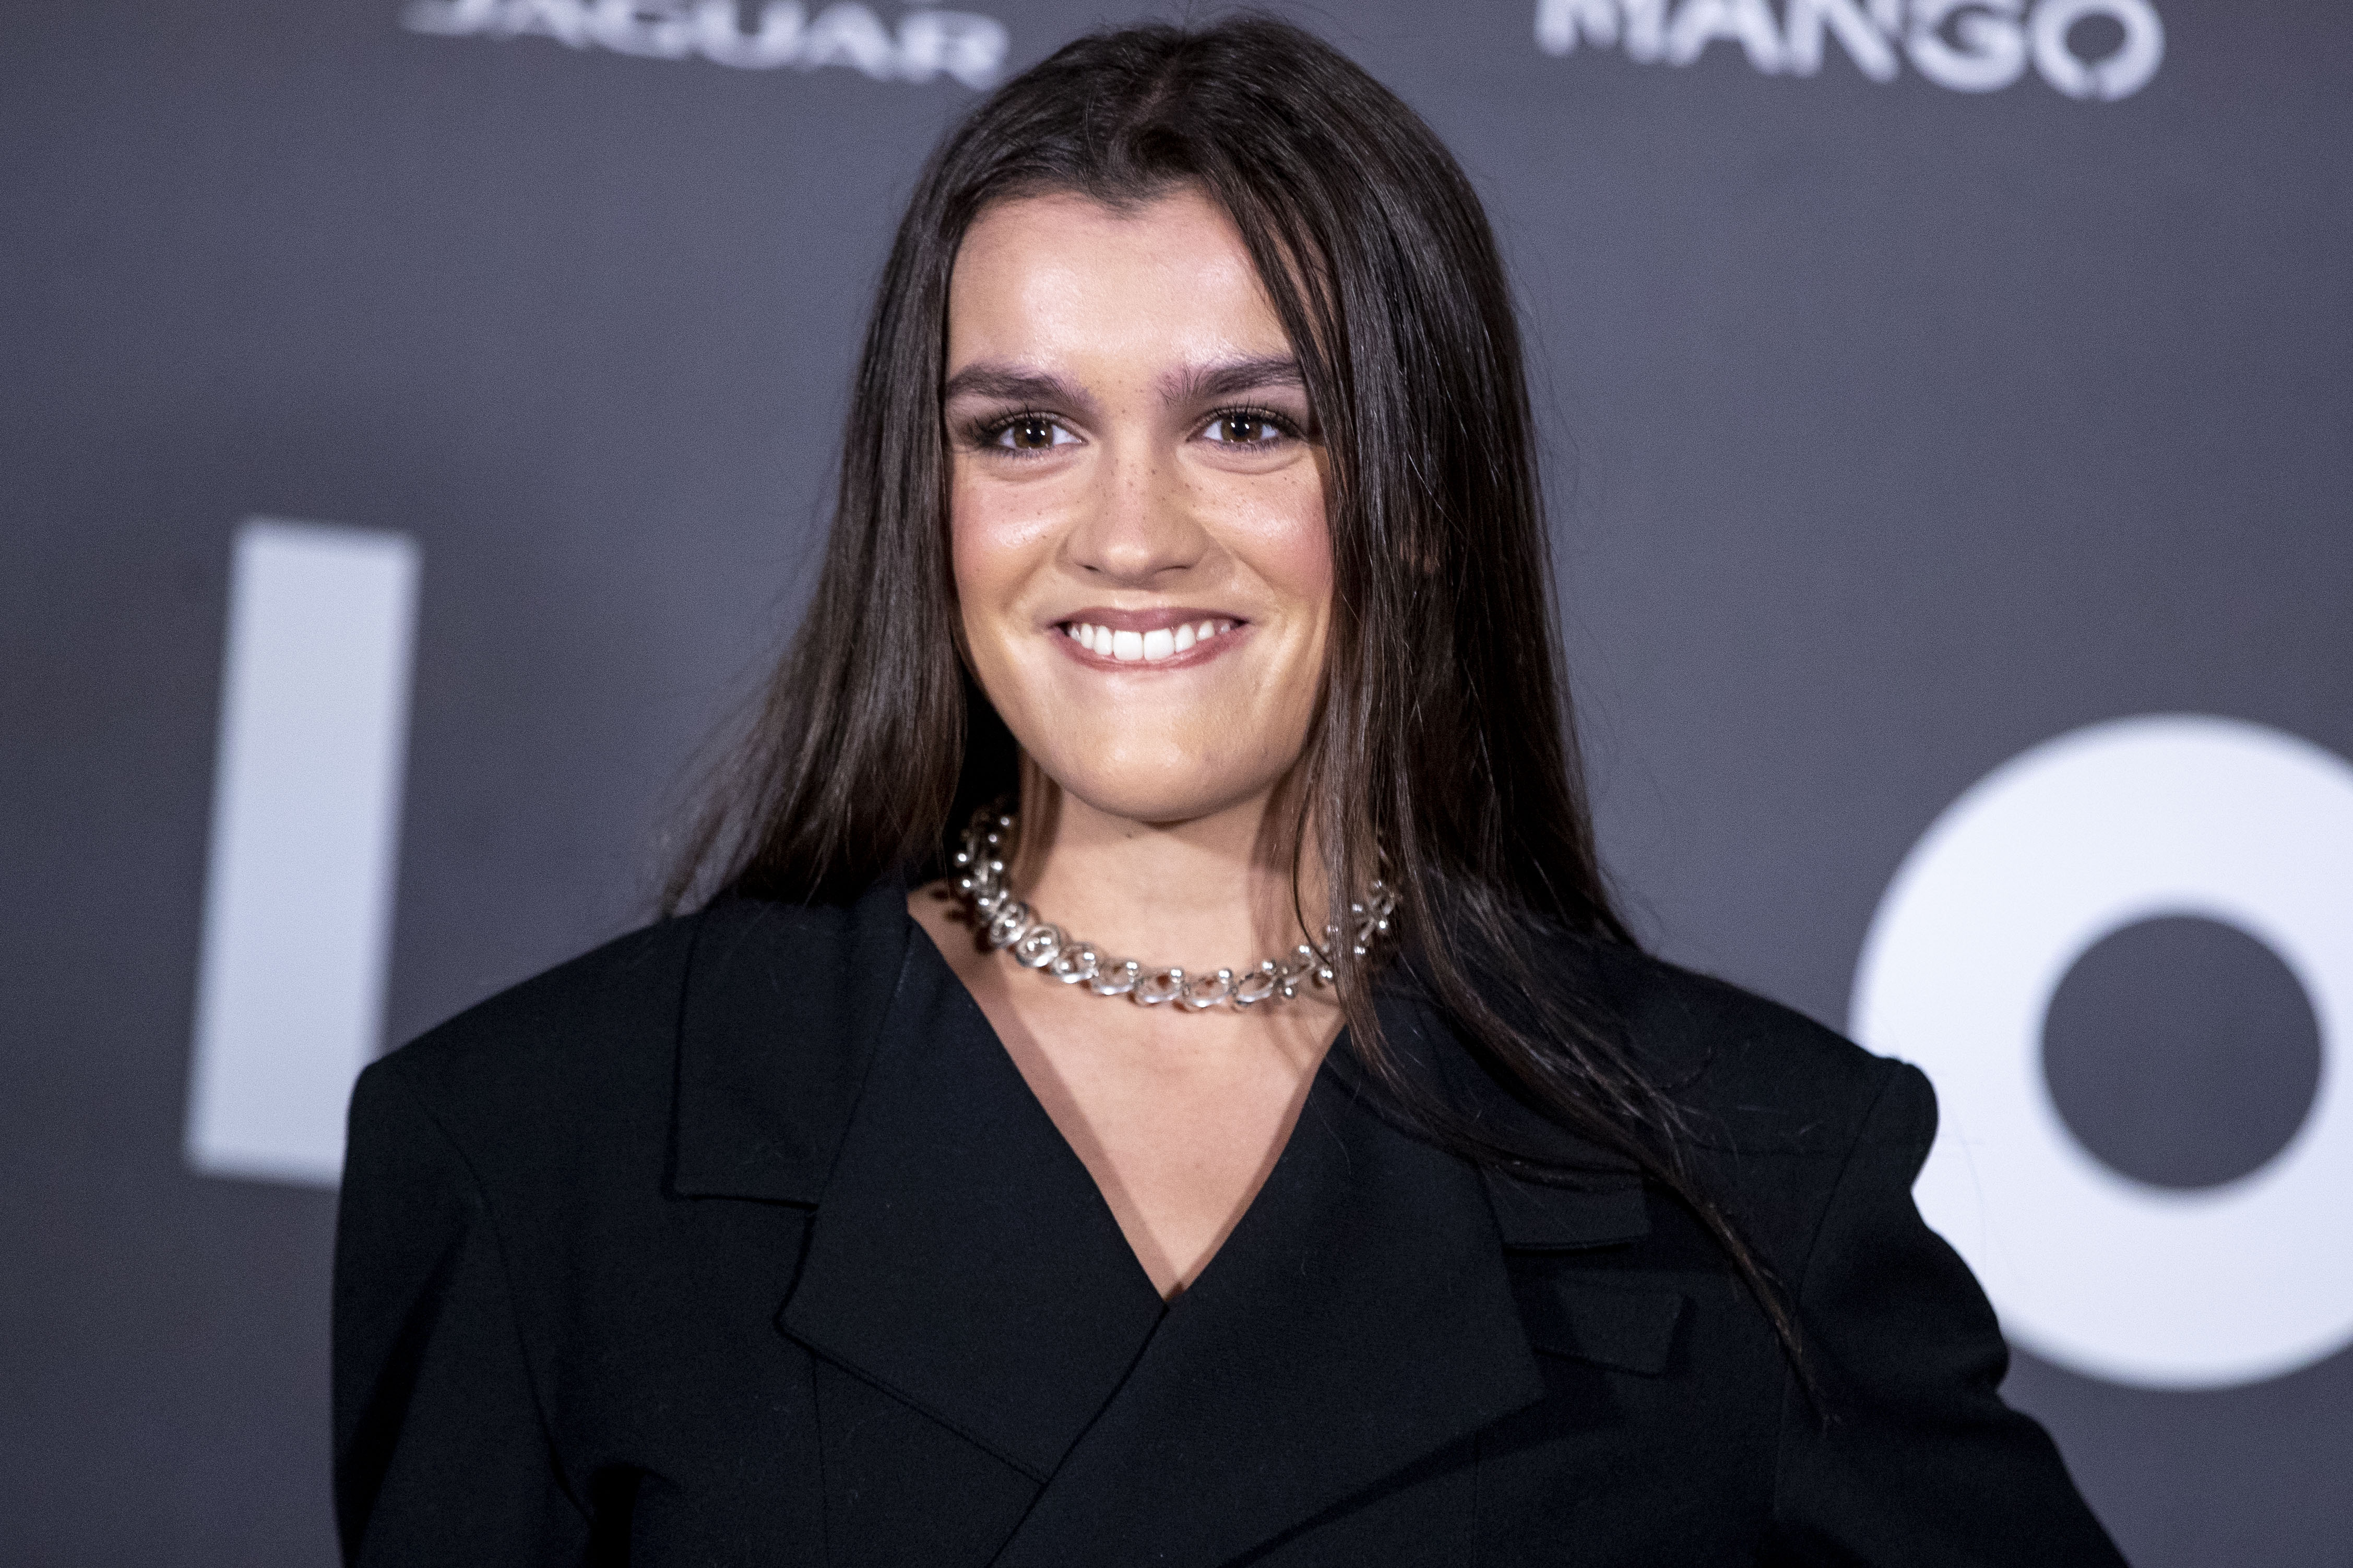 Amaia Romero has worn a very different look at the ICON awards gala.